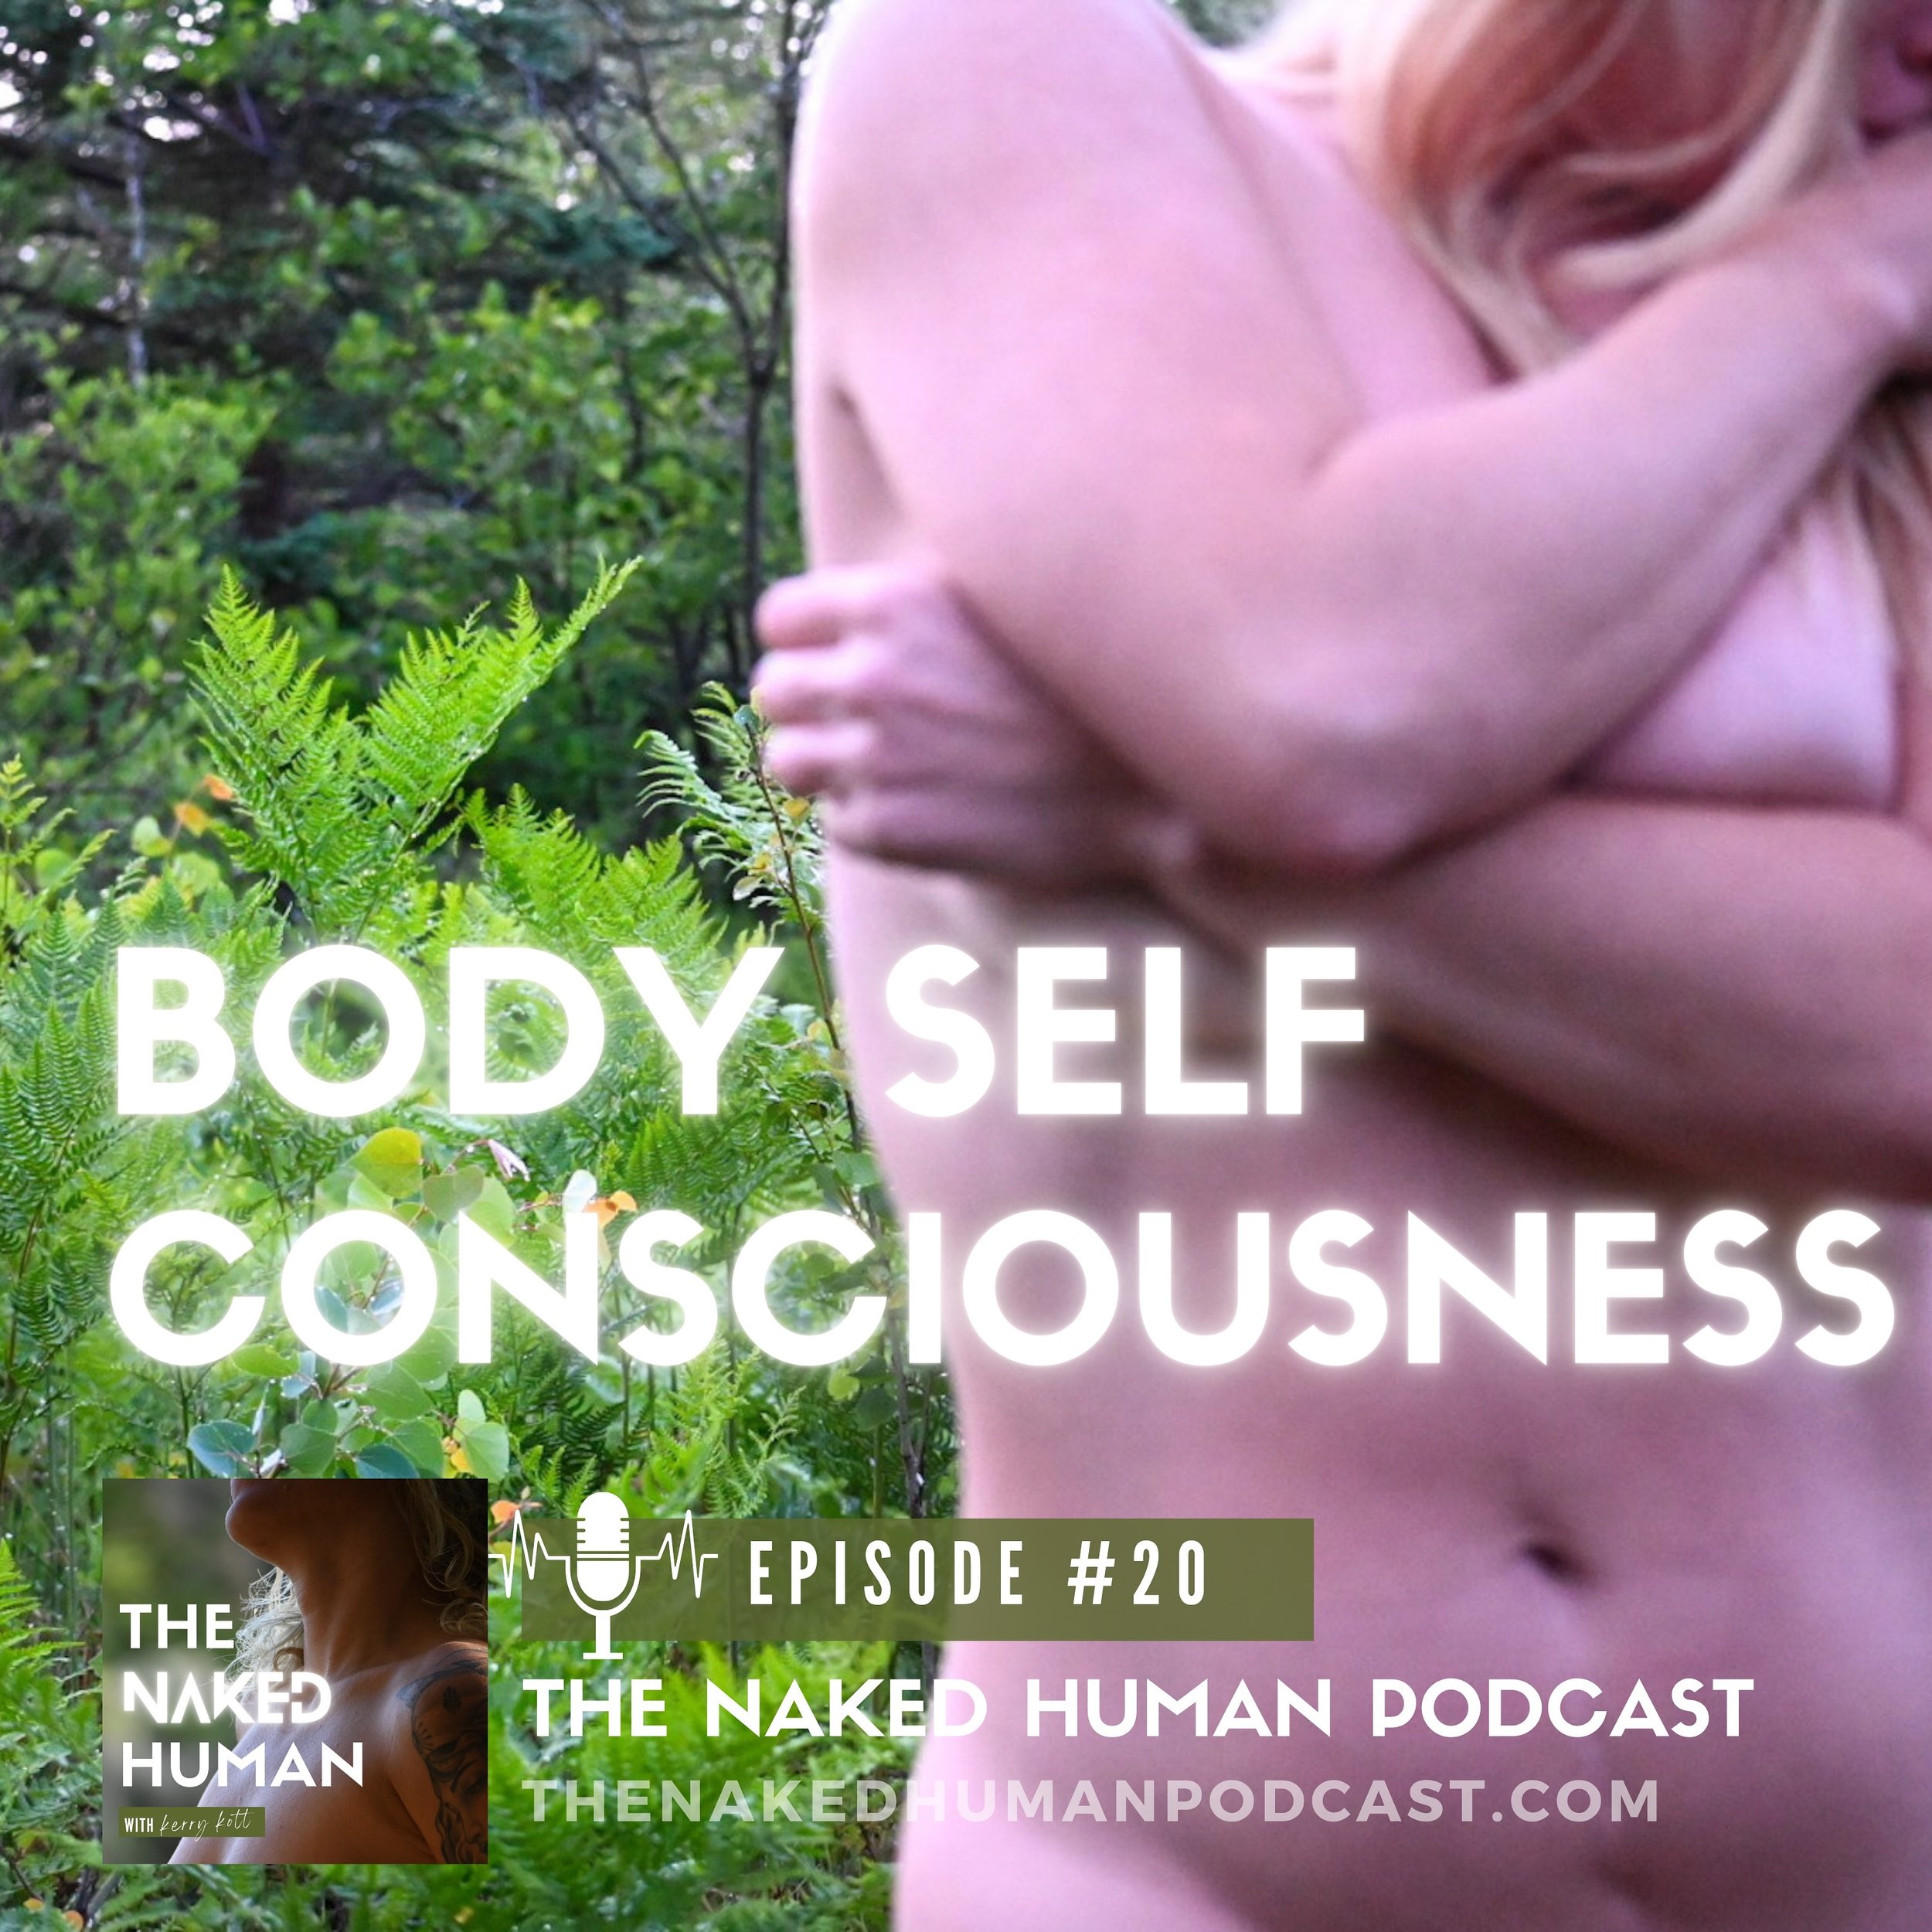 In this episode, we delve into the root causes body self-consciousness, exploring how societal standards and personal experiences shape our perceptions. If you&rsquo;re struggling with insecurities, this episode offers empowering perspectives to insp